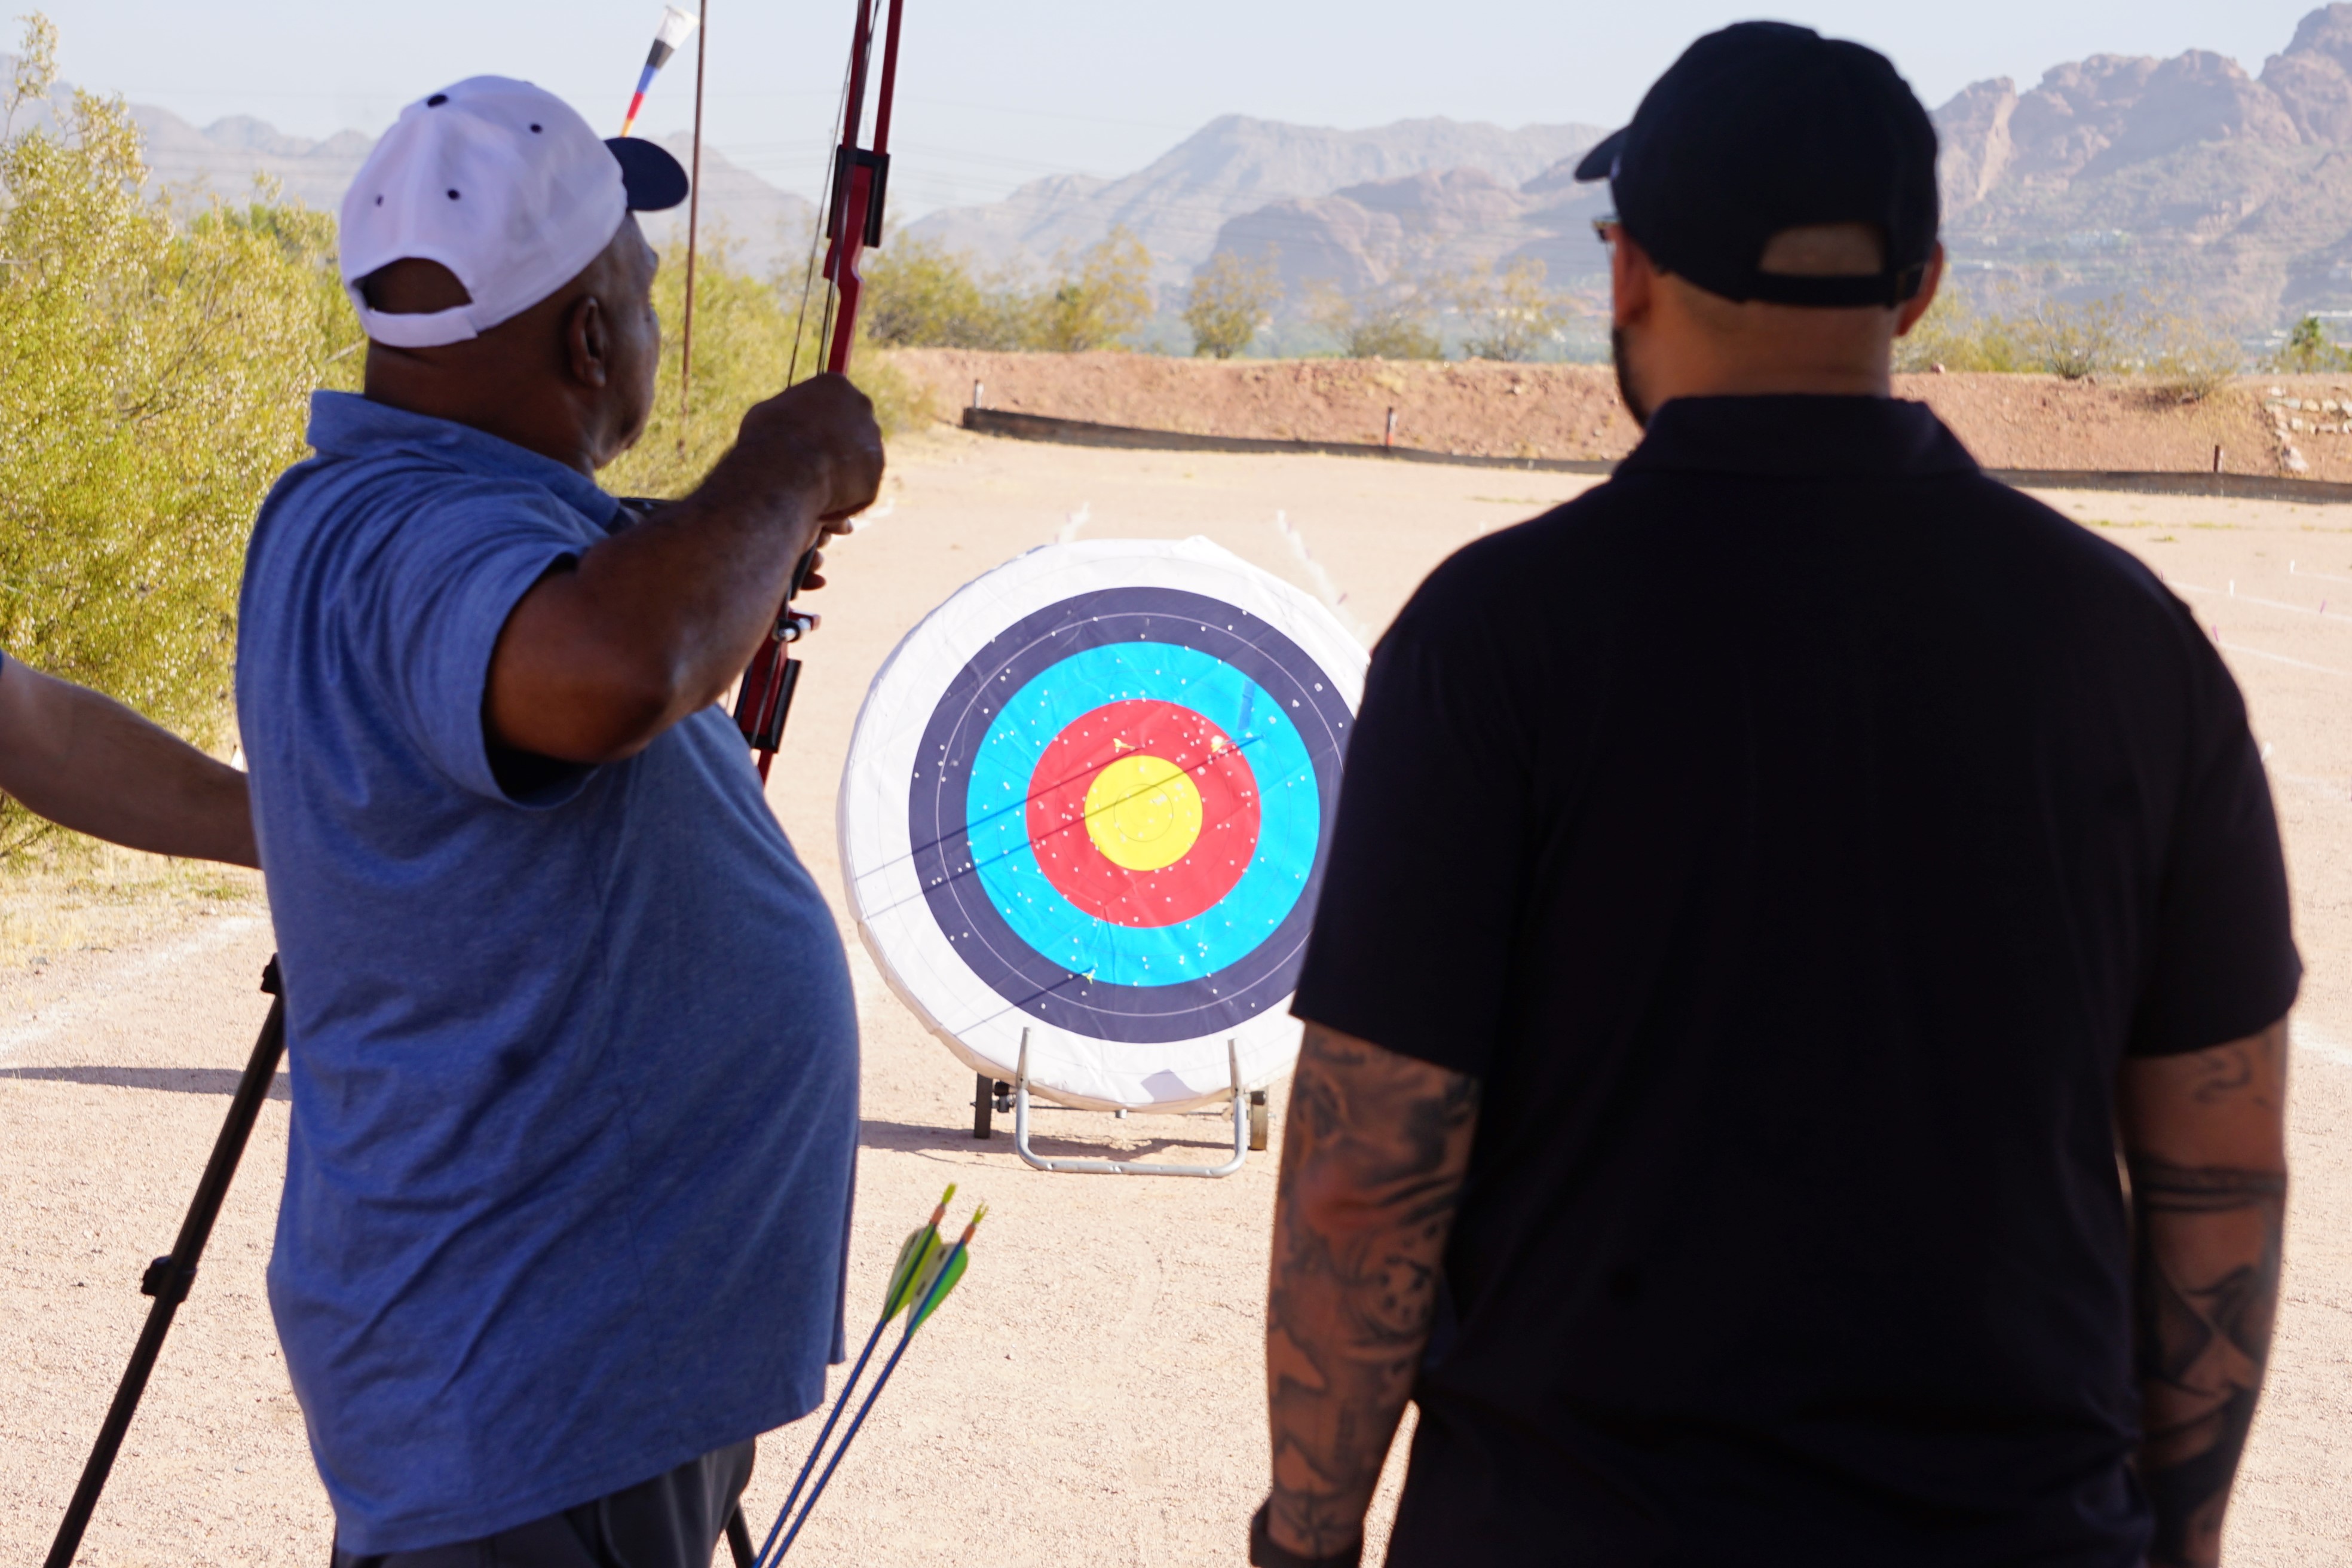 James Malone stands behind a target holding a bow and arrow as Rick Alvarado watches